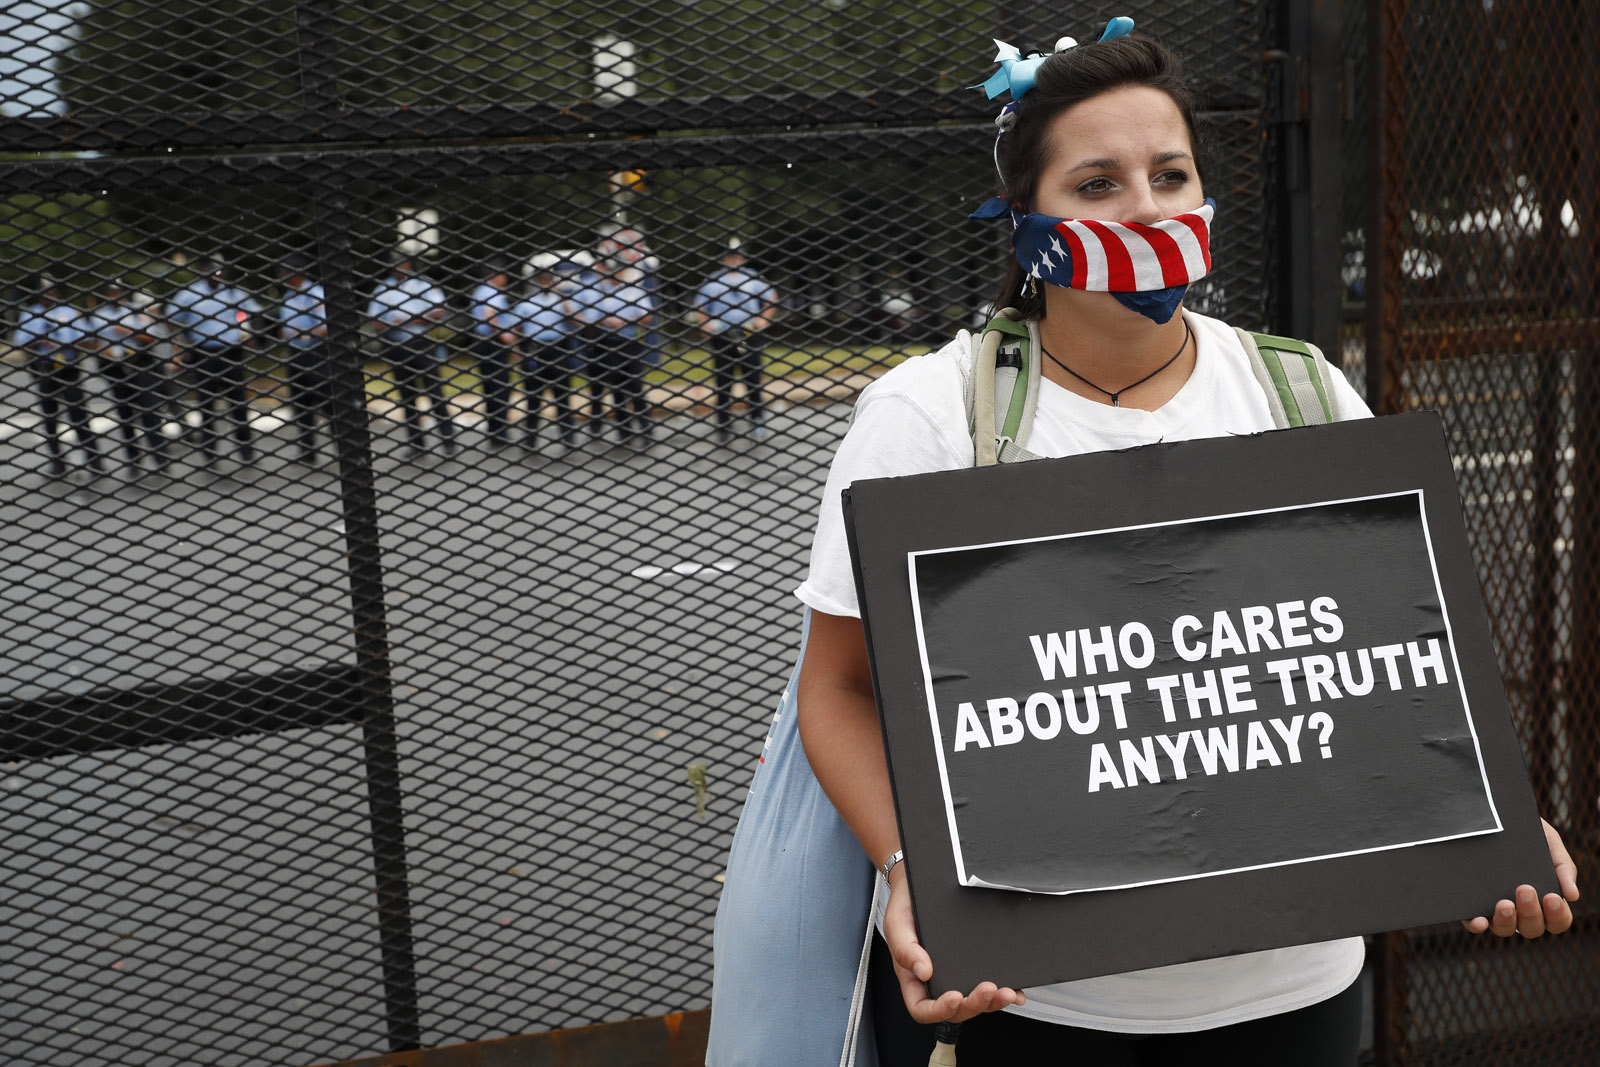 Demonstrators picket a fence as police stand guard during a protest at Franklin Delano Roosevelt park, Thursday, July 28, 2016, in Philadelphia. (AP Photo/John Minchillo)